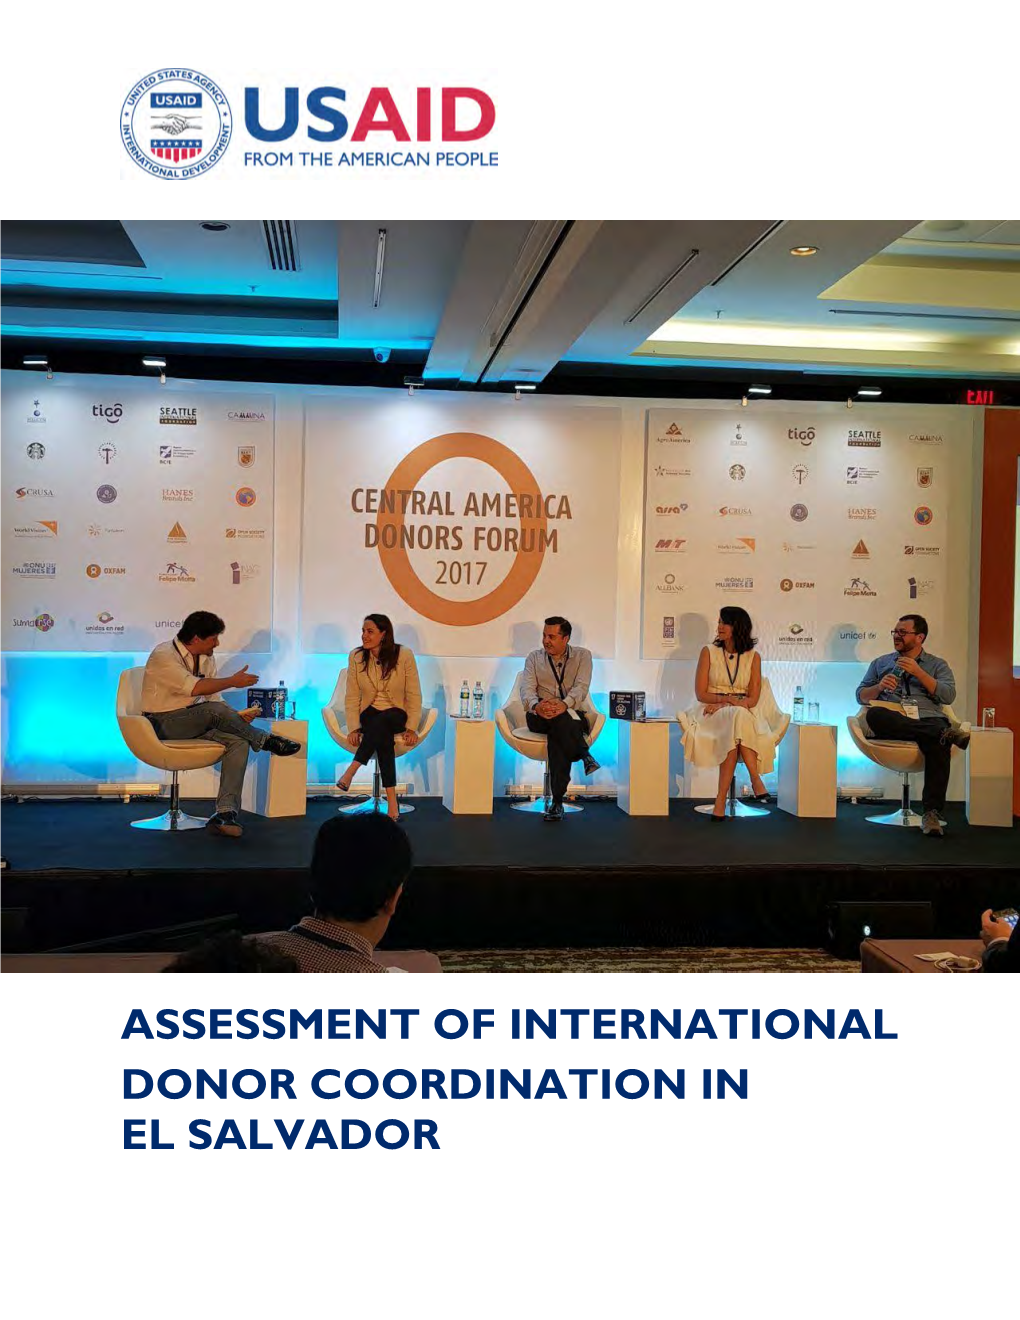 Assessment of the International Donor Coordination in El Salvador